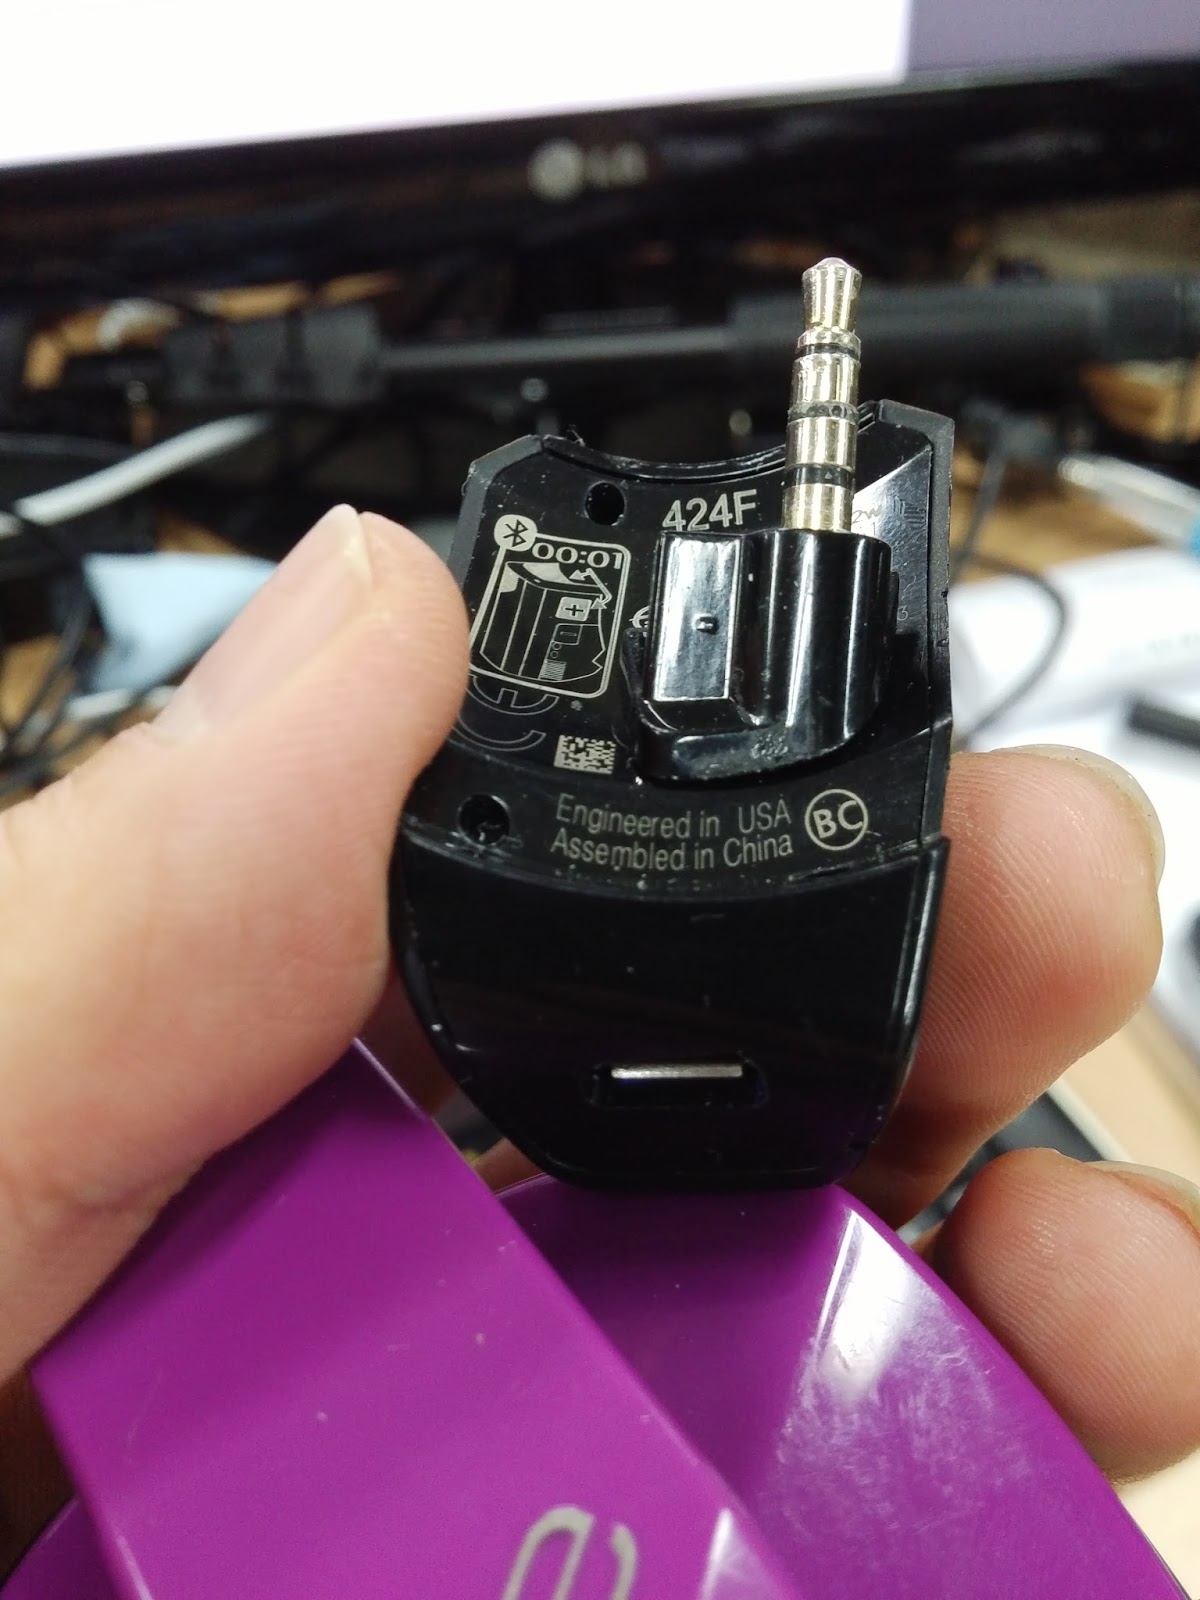 [How to] Upgrade Bose AE2W bluetooth module to general 3.5mm plug